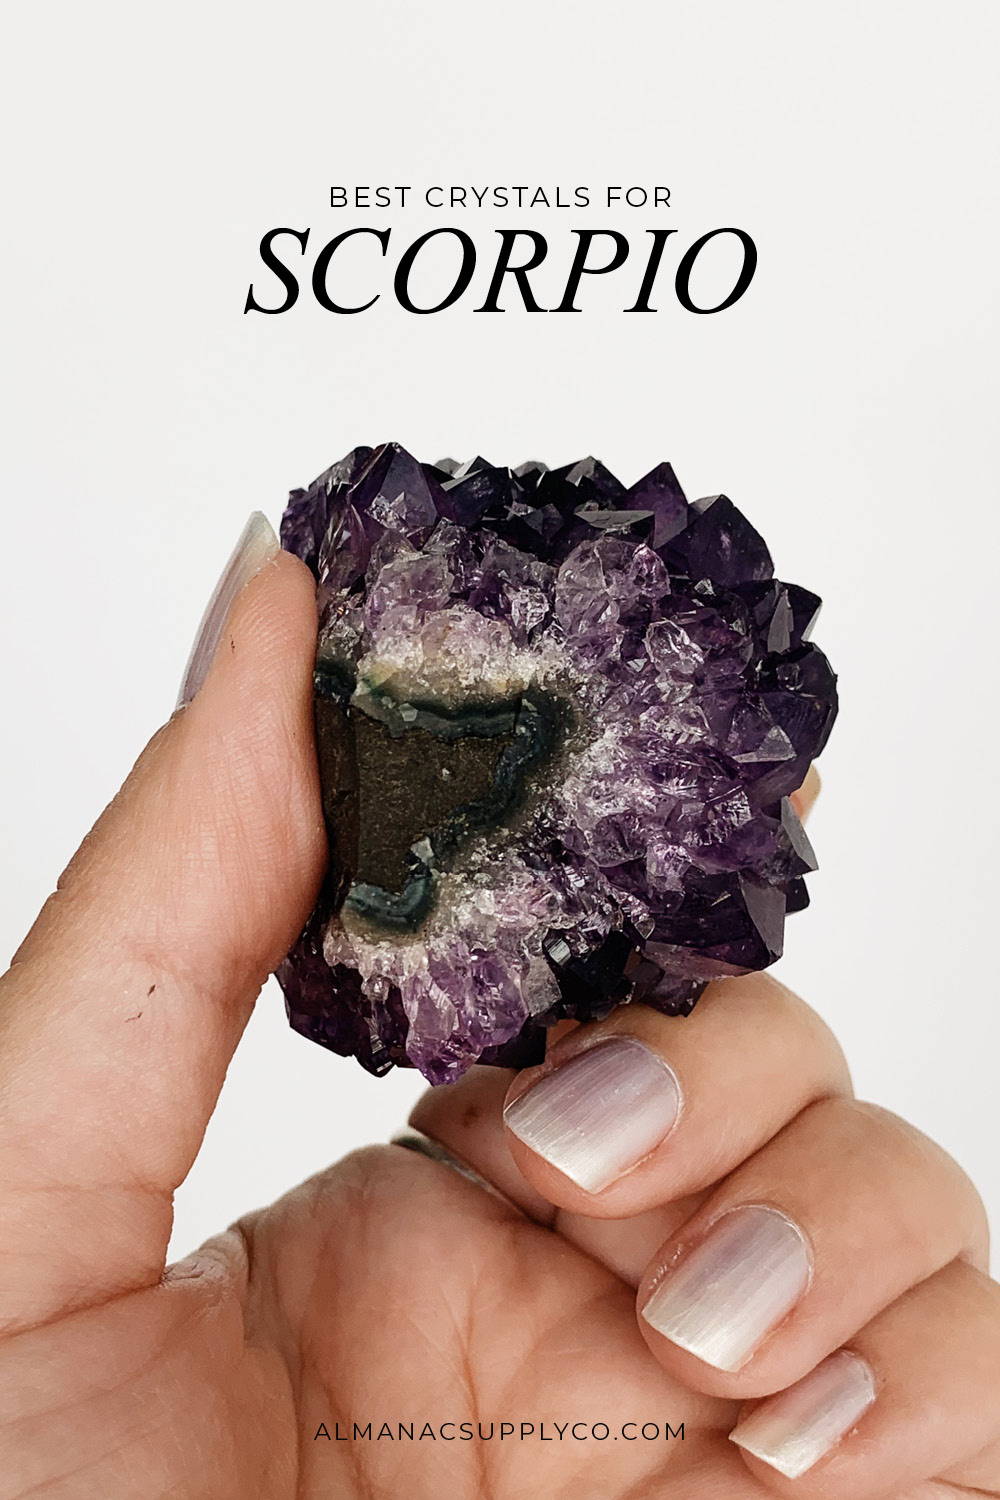 The Best Crystals for Scorpio